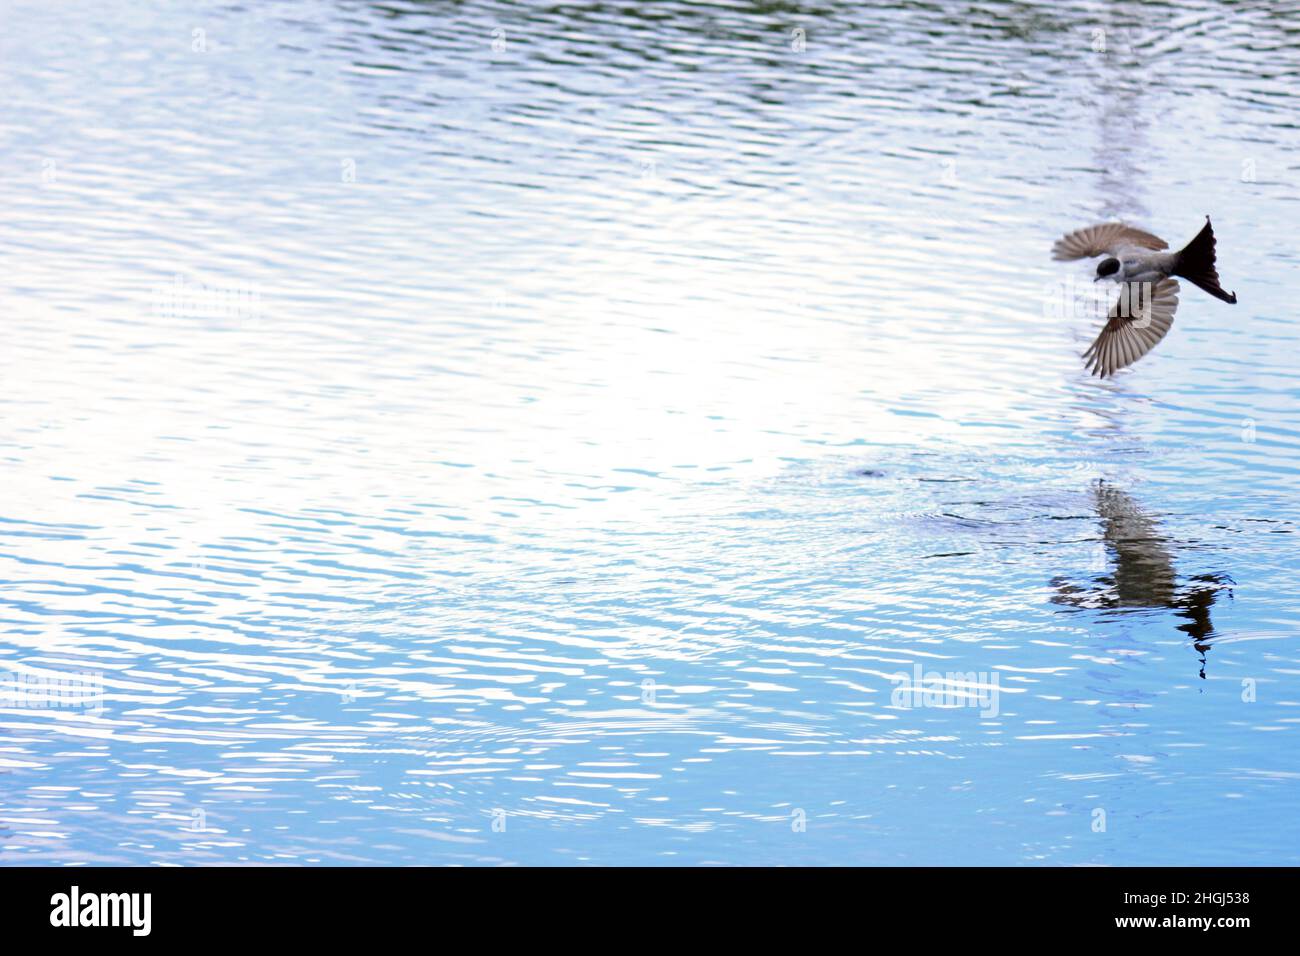 The swooping flight of a bird, with open wings, over the rippling waters of the lagoon. Stock Photo